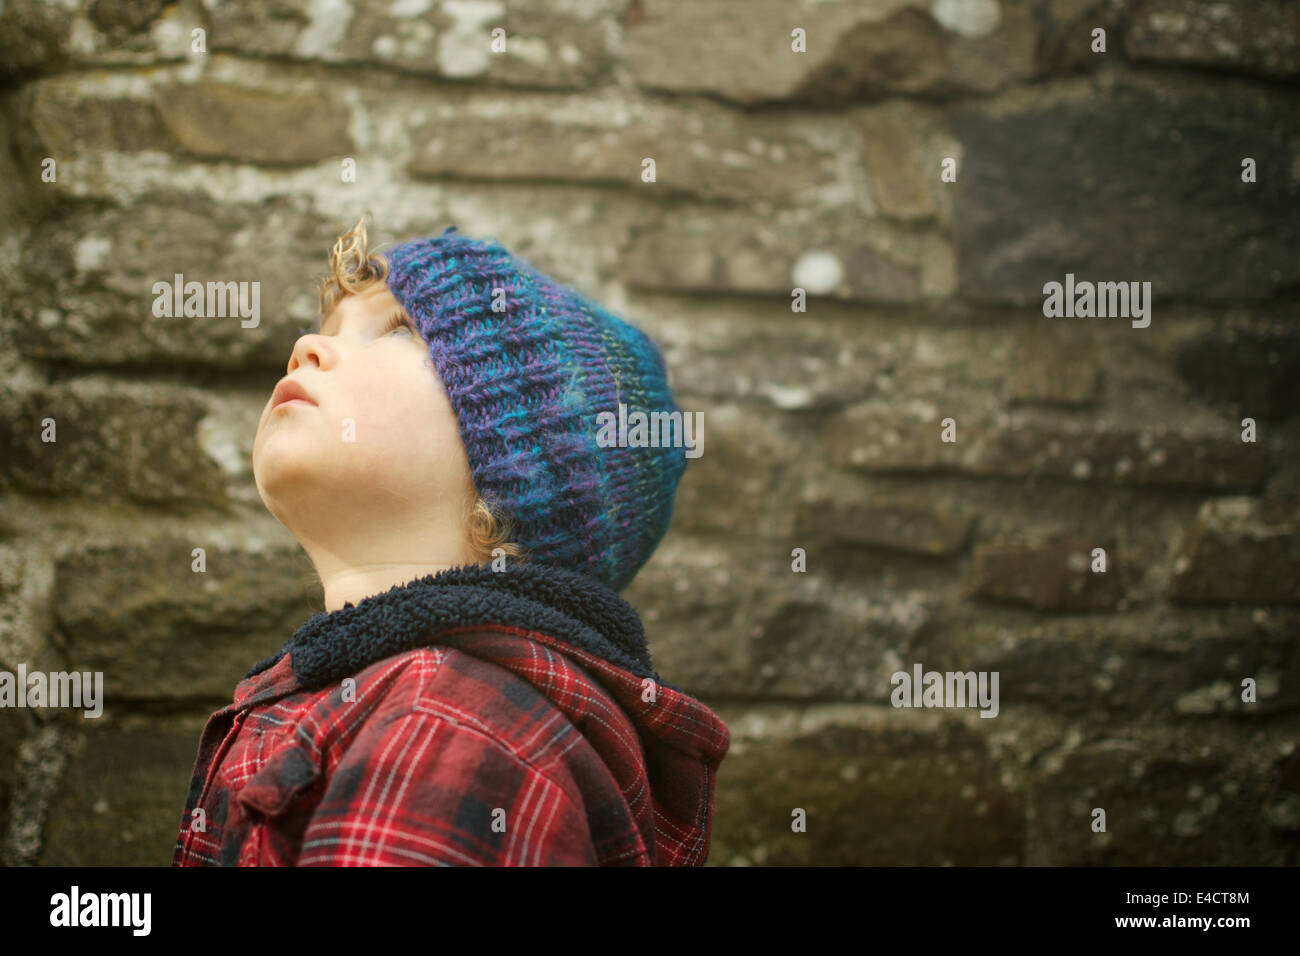 boy looks up against a stone wall Stock Photo